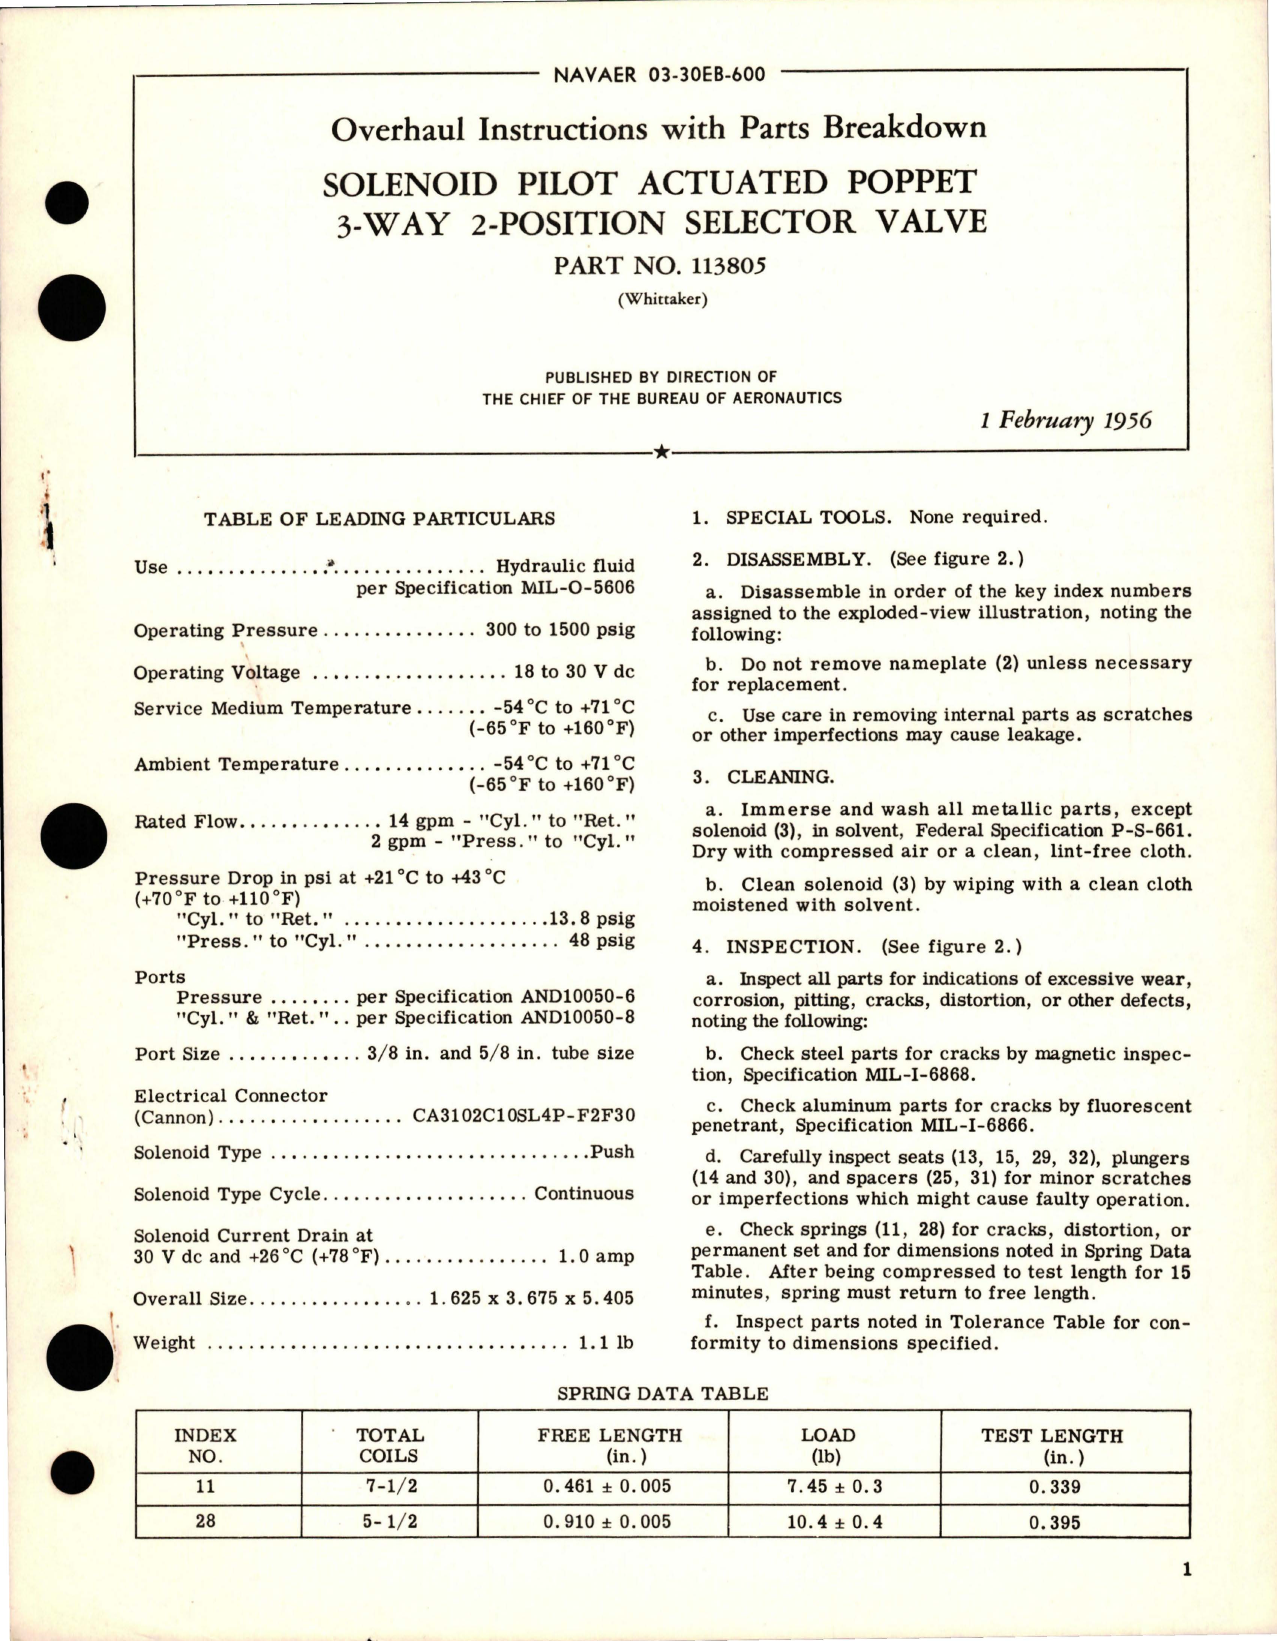 Sample page 1 from AirCorps Library document: Overhaul Instructions with Parts Breakdown for Solenoid Pilot Actuated Poppet 3-Way 2-Position Selector Valve - Part 113805